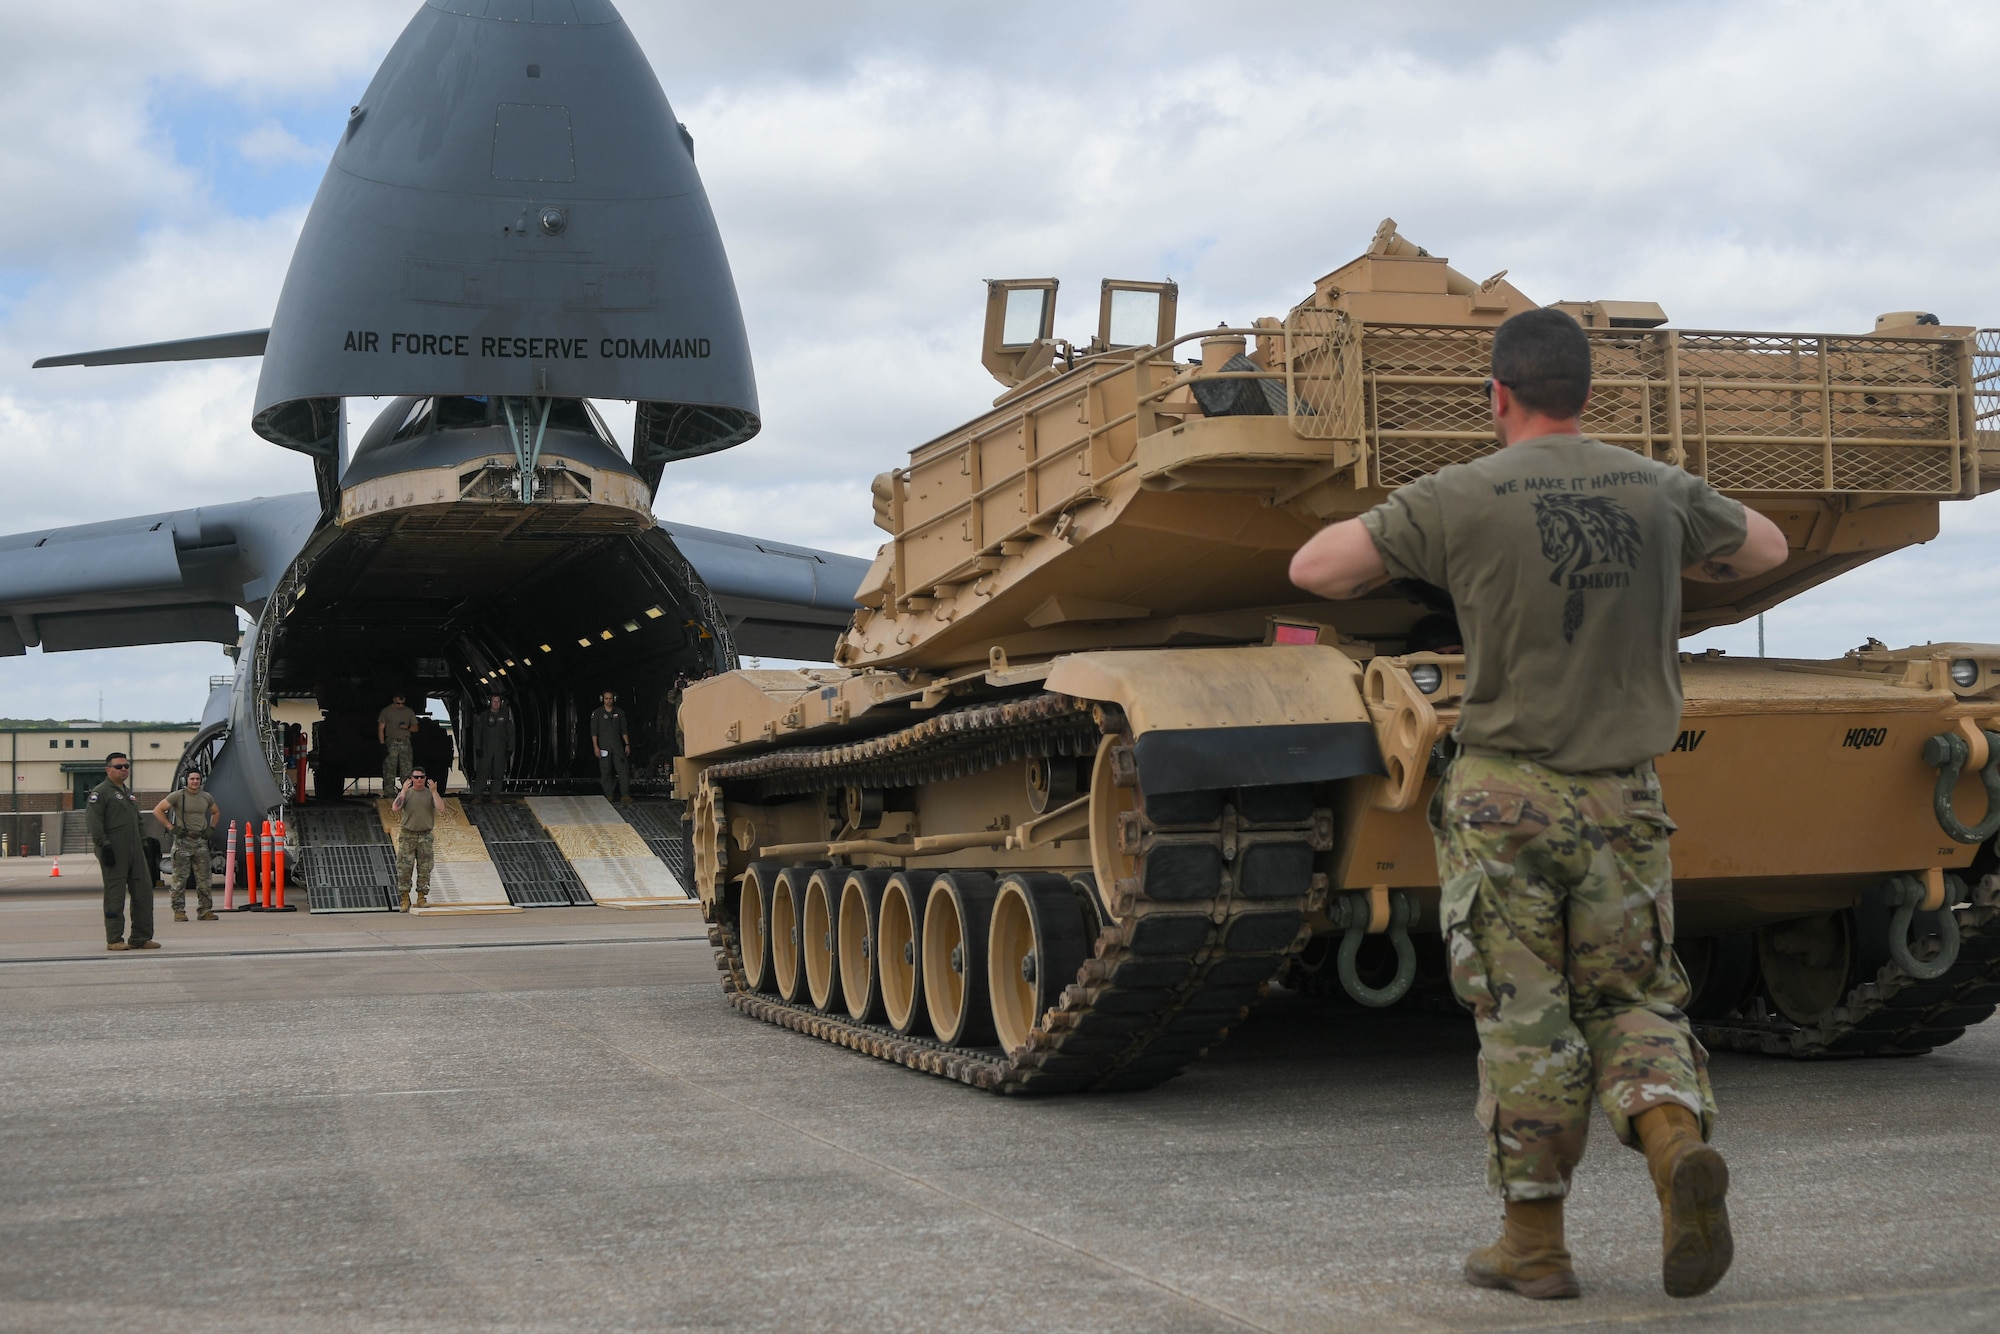 Tank crewmen assigned to the 1st Armored Brigade Combat Team, 1st Cavalry Division, guide an Abrams M1A2 System Enhancement Program Version 3 tank assigned to the 2nd Battalion, 12th Cavalry Regiment, onto a 433rd Airlift Wing C-5M Super Galaxy aircraft at Robert Gray Army Airfield, Fort Hood, Texas, April 20, 2022. The Abrams M1A2 SEPv3 was flown to Joint Base San Antonio-Randolph, Texas, to be displayed as part of The Great Texas Air Show, April 23-24, 2022.